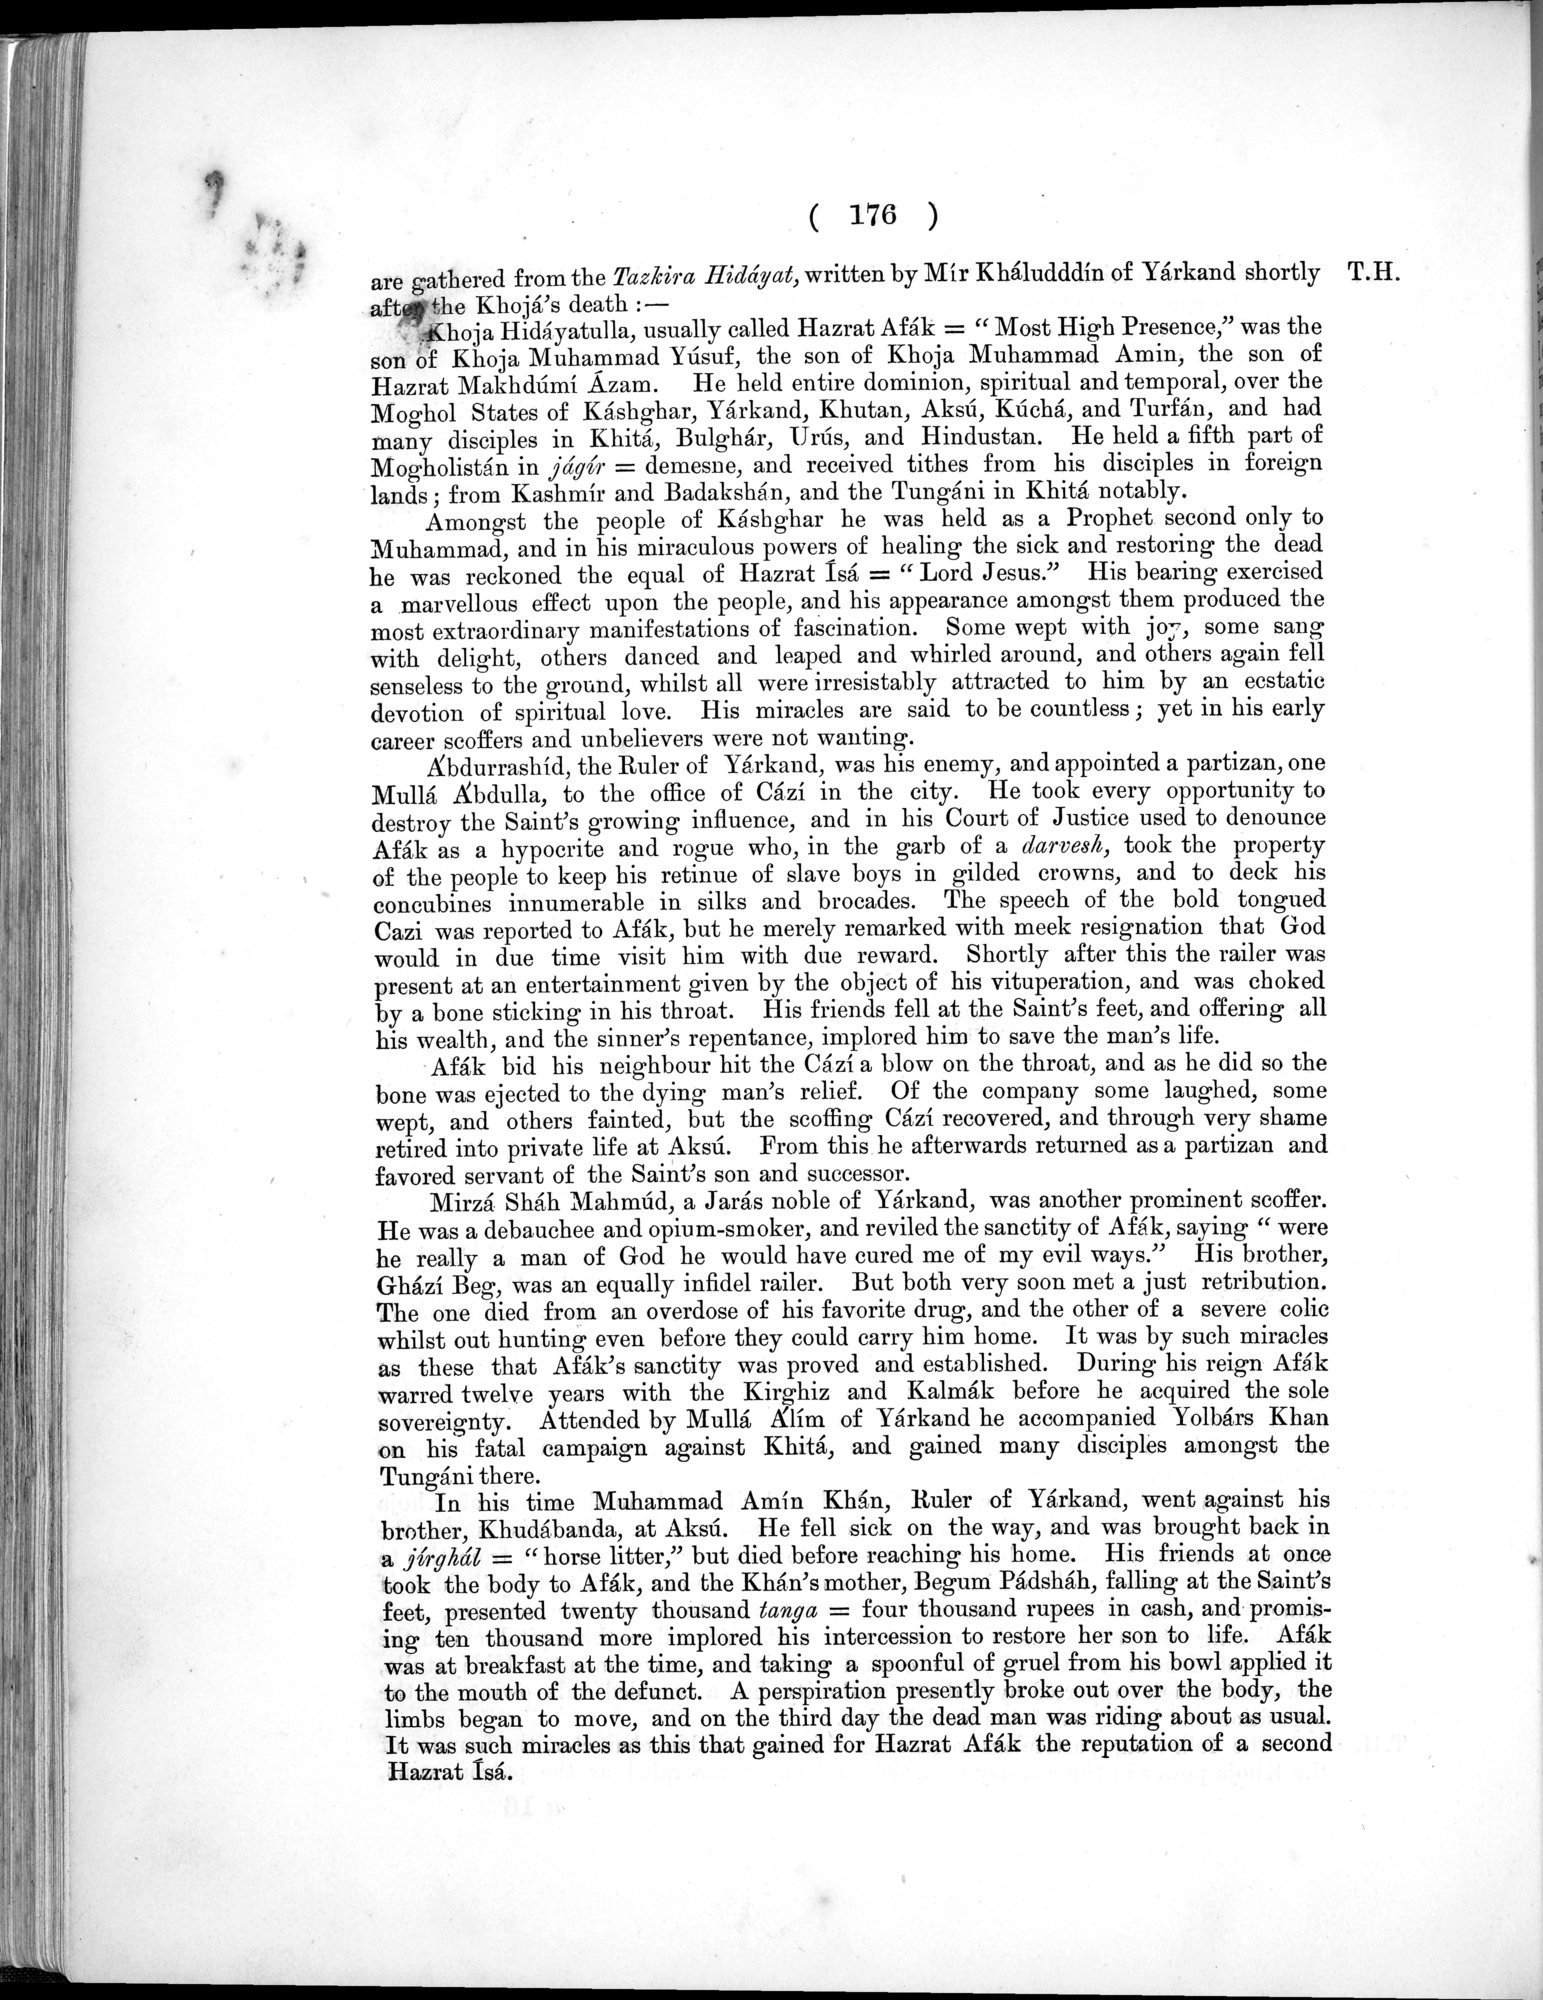 Report of a Mission to Yarkund in 1873 : vol.1 / Page 256 (Grayscale High Resolution Image)